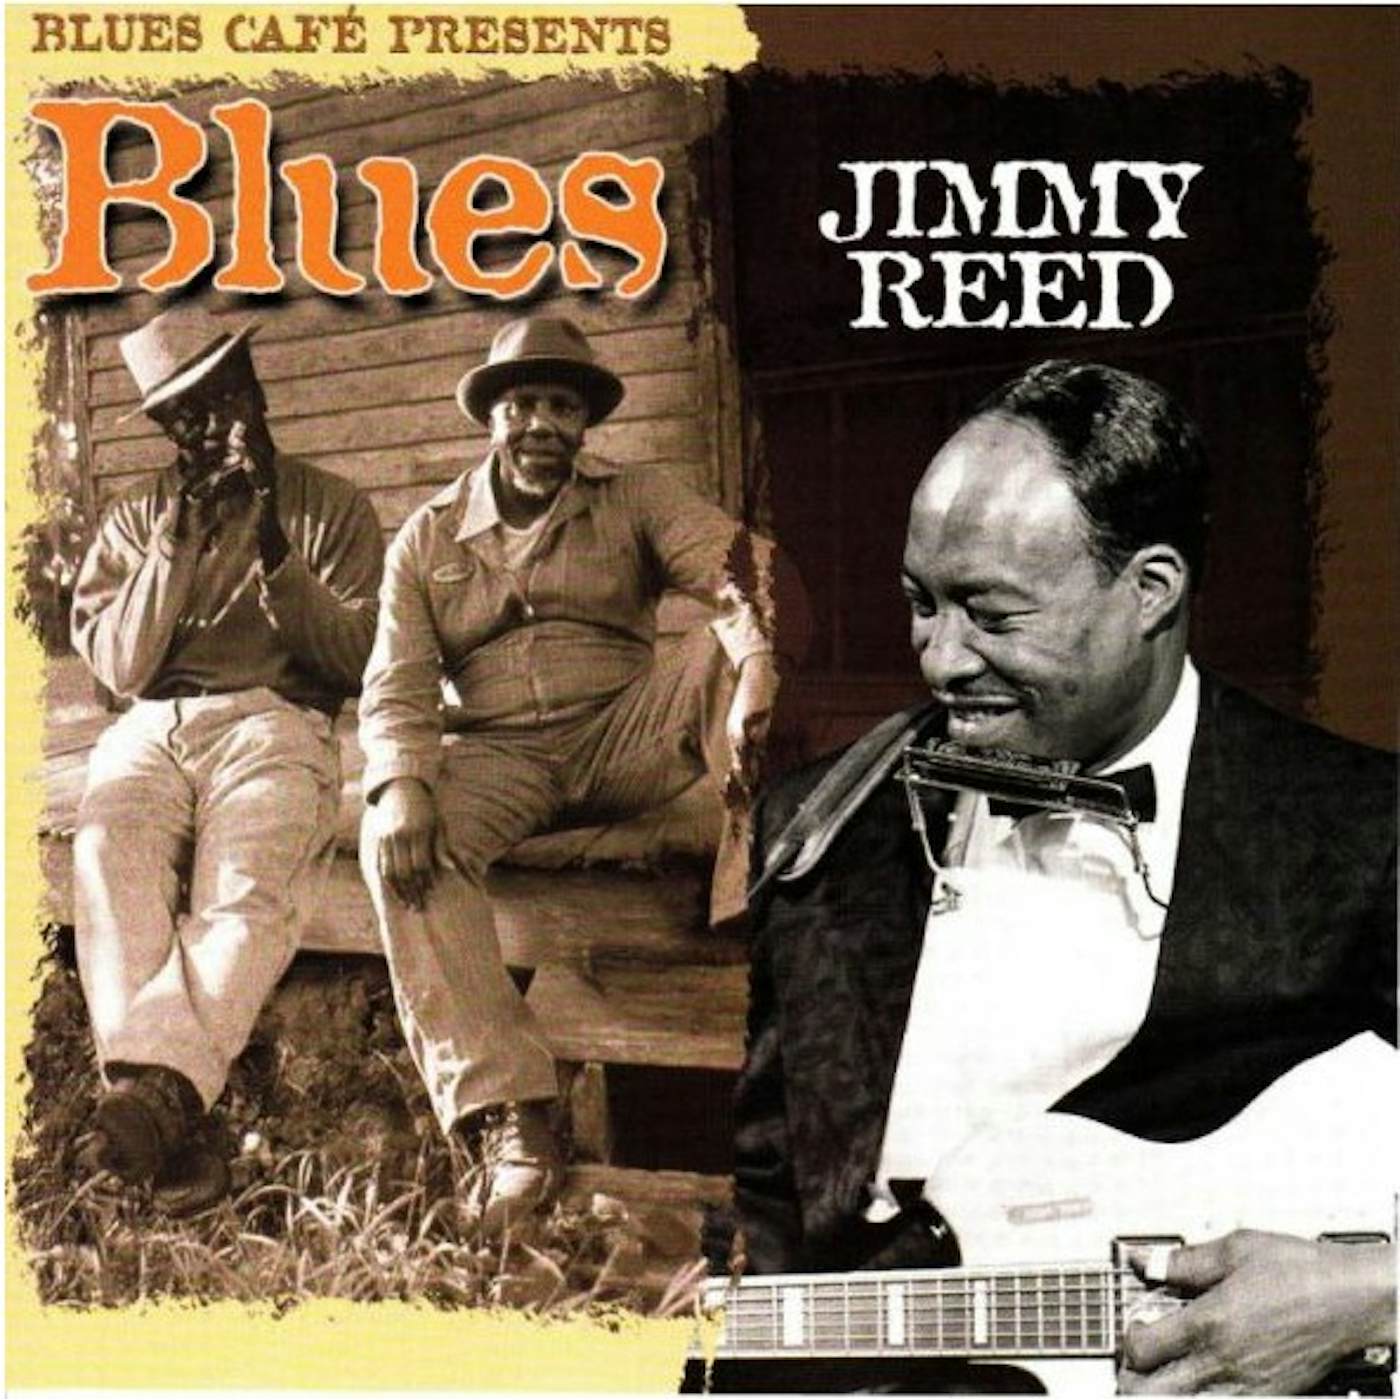 BLUES CAFE PRESENTS JIMMY REED CD